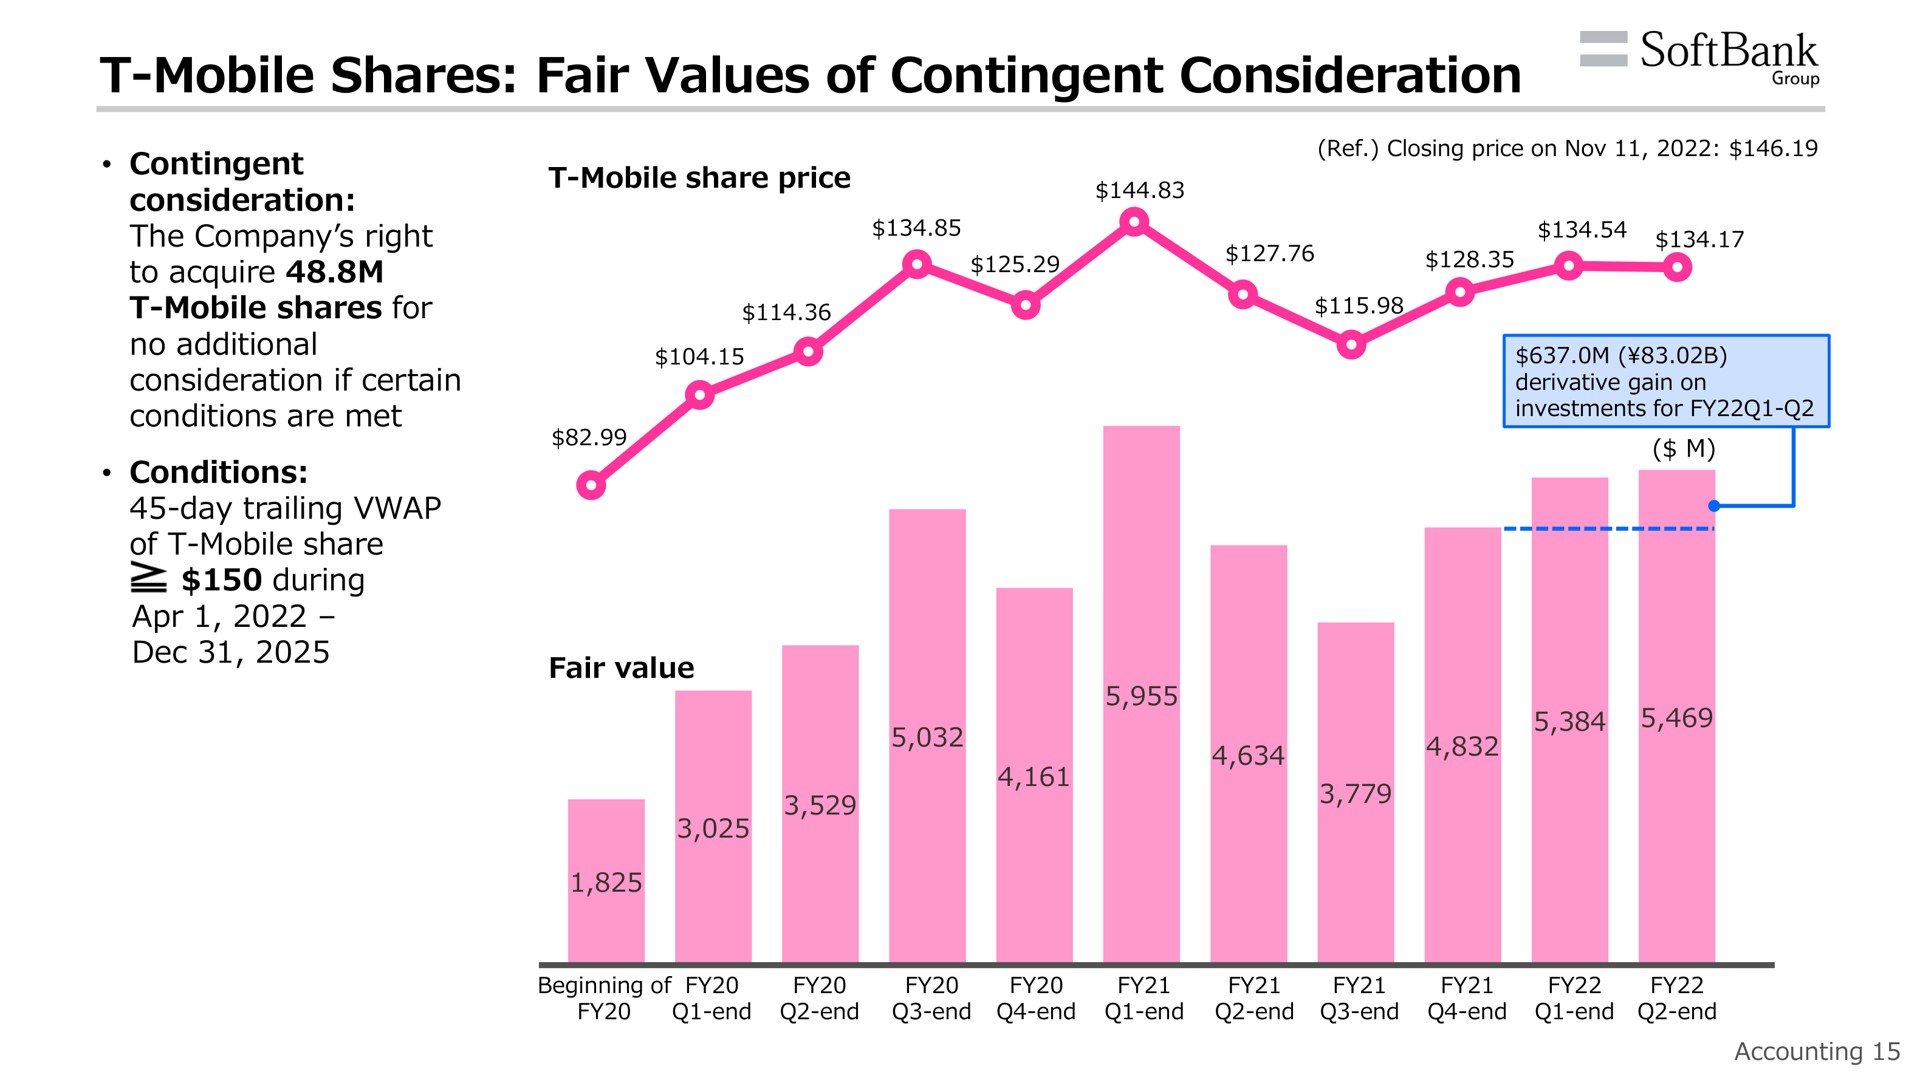 mobile shares fair values of contingent consideration during | SoftBank